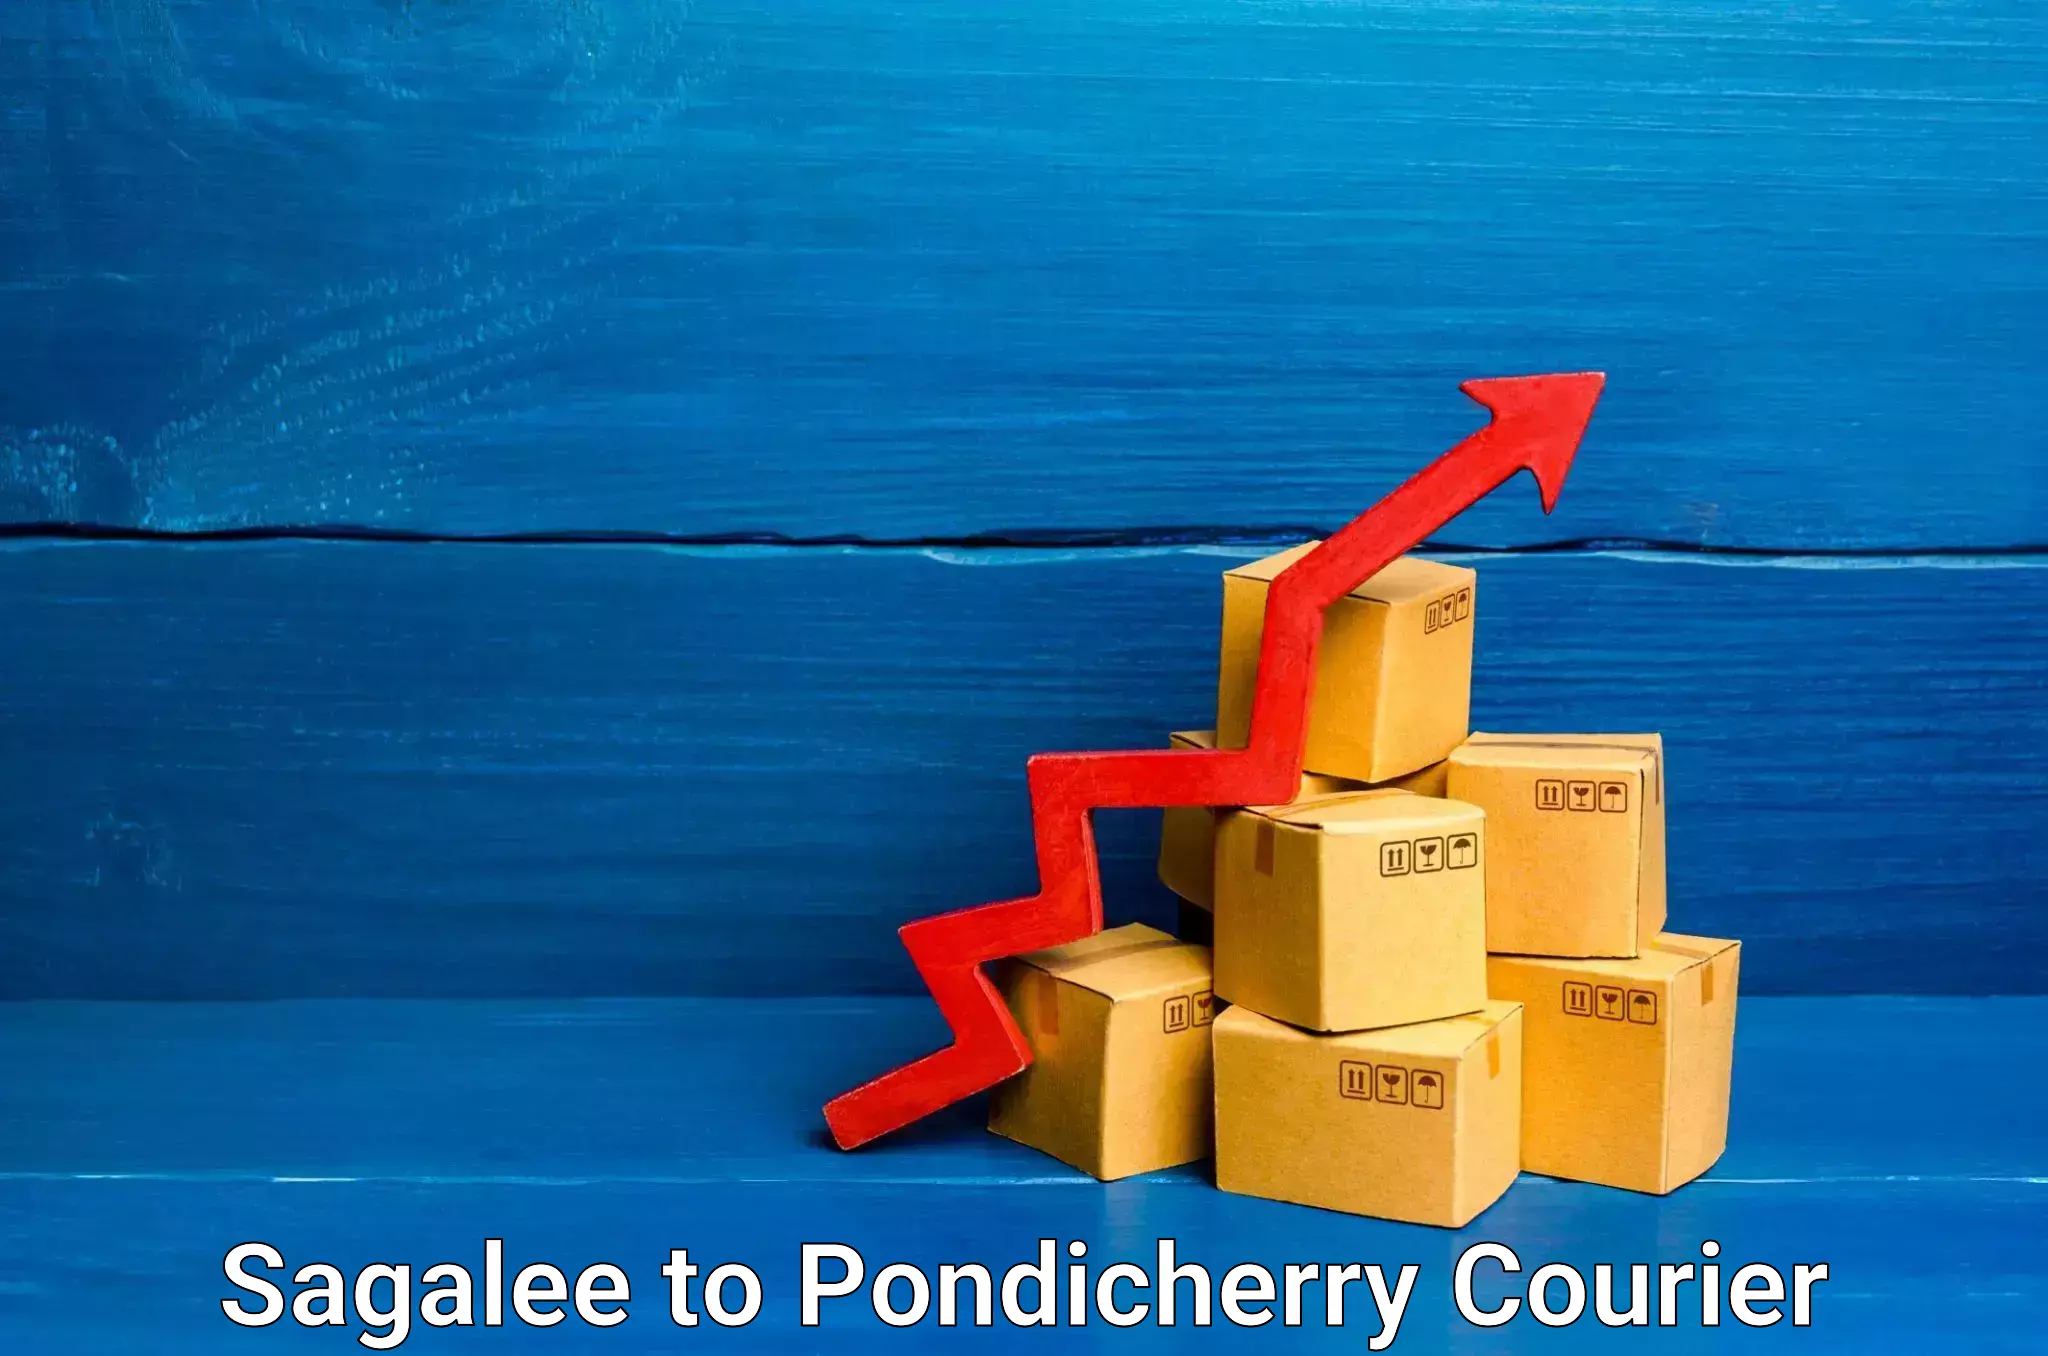 Nationwide delivery network Sagalee to Pondicherry